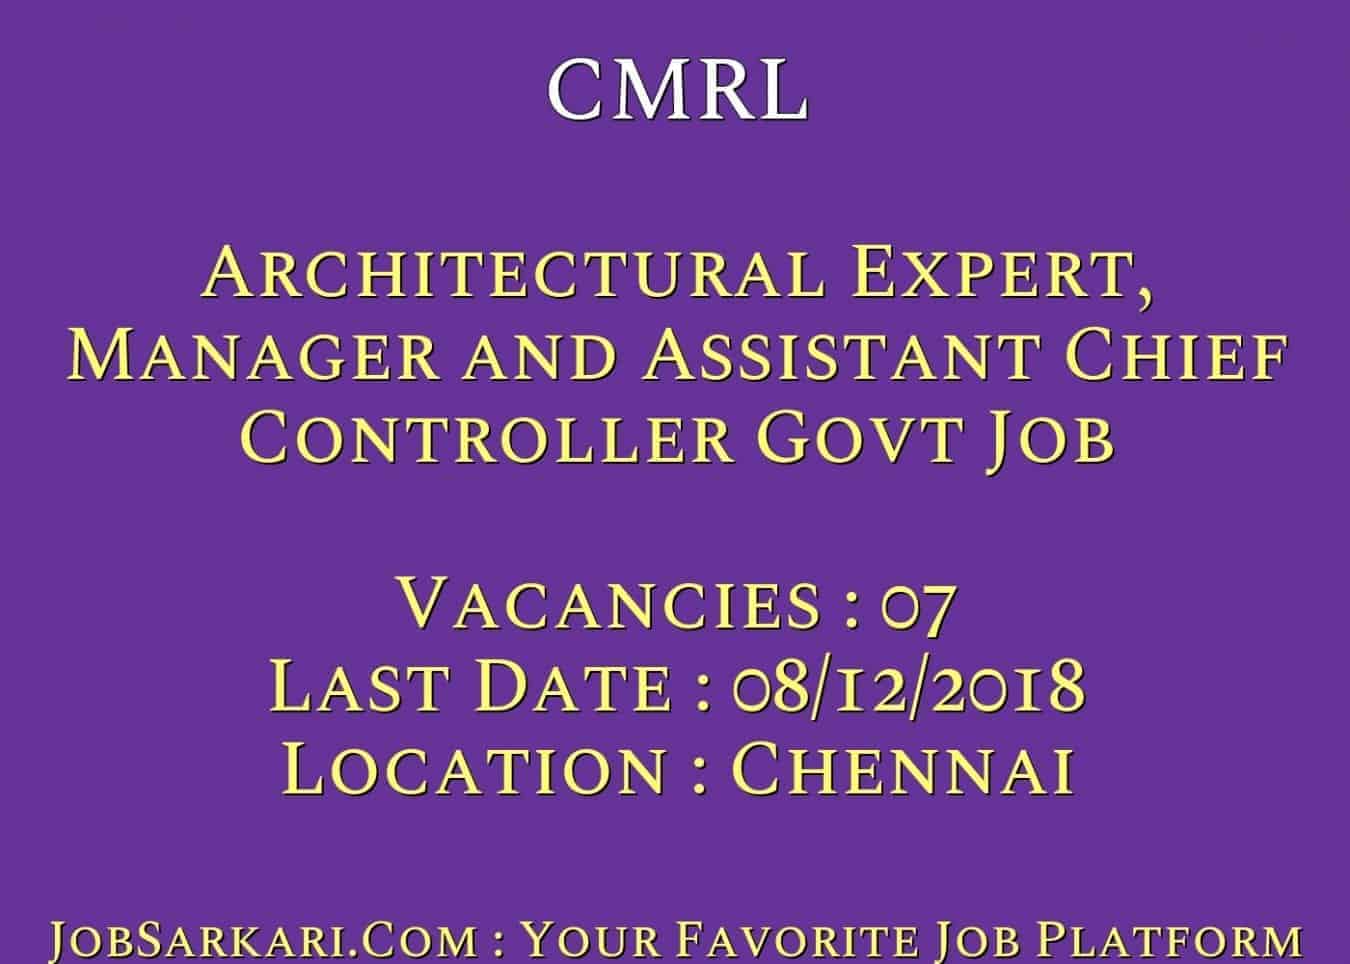 CMRL Recruitment 2018 for Architectural Expert, Manager and Assistant Chief Controller Govt Job